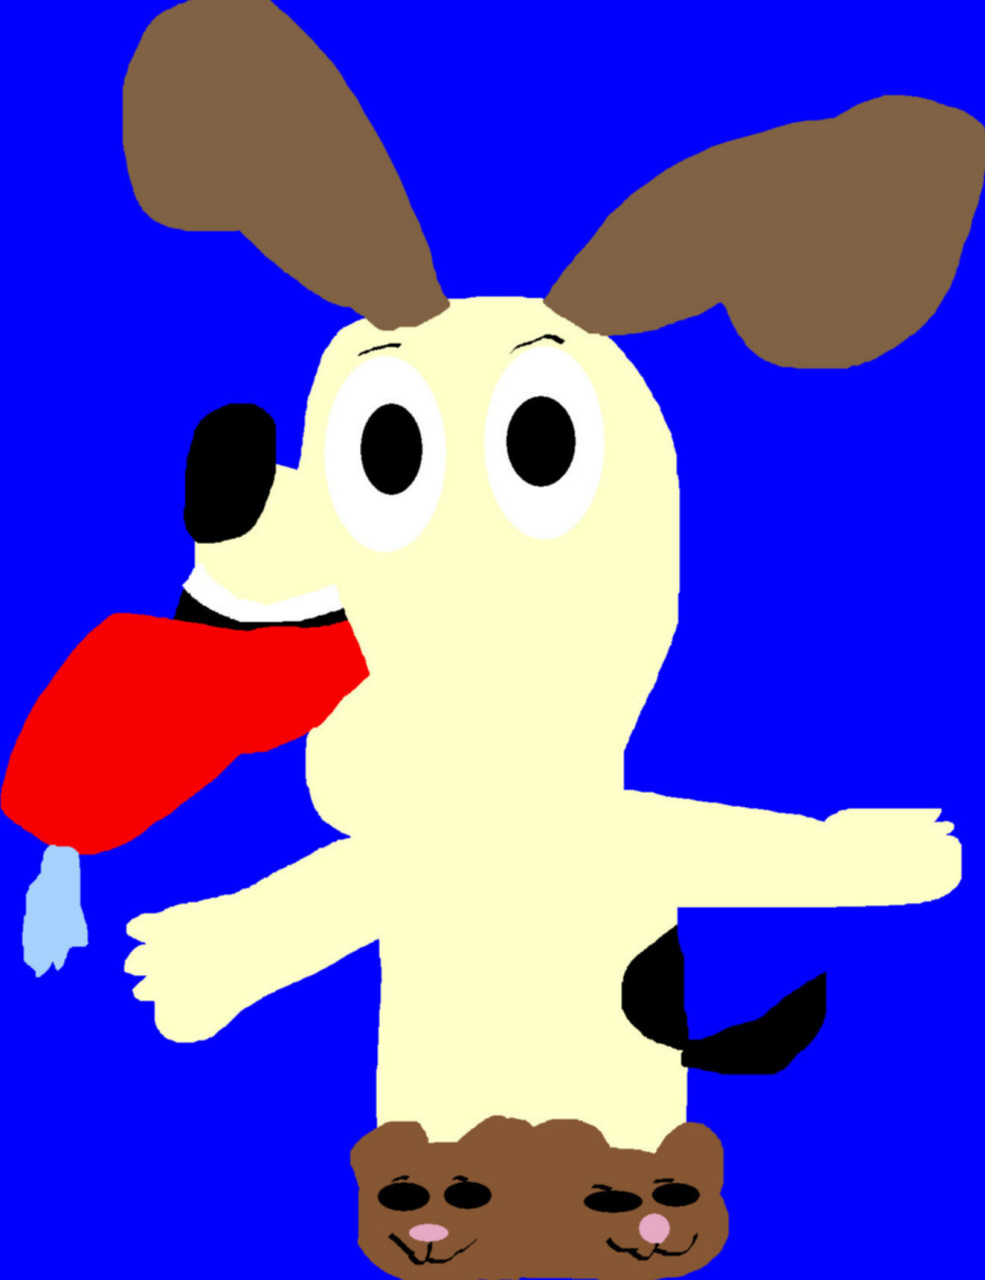 Chubby Odie In Pooky Slippers MS Paint B Day Gift For TeeJay87 by Falconlobo